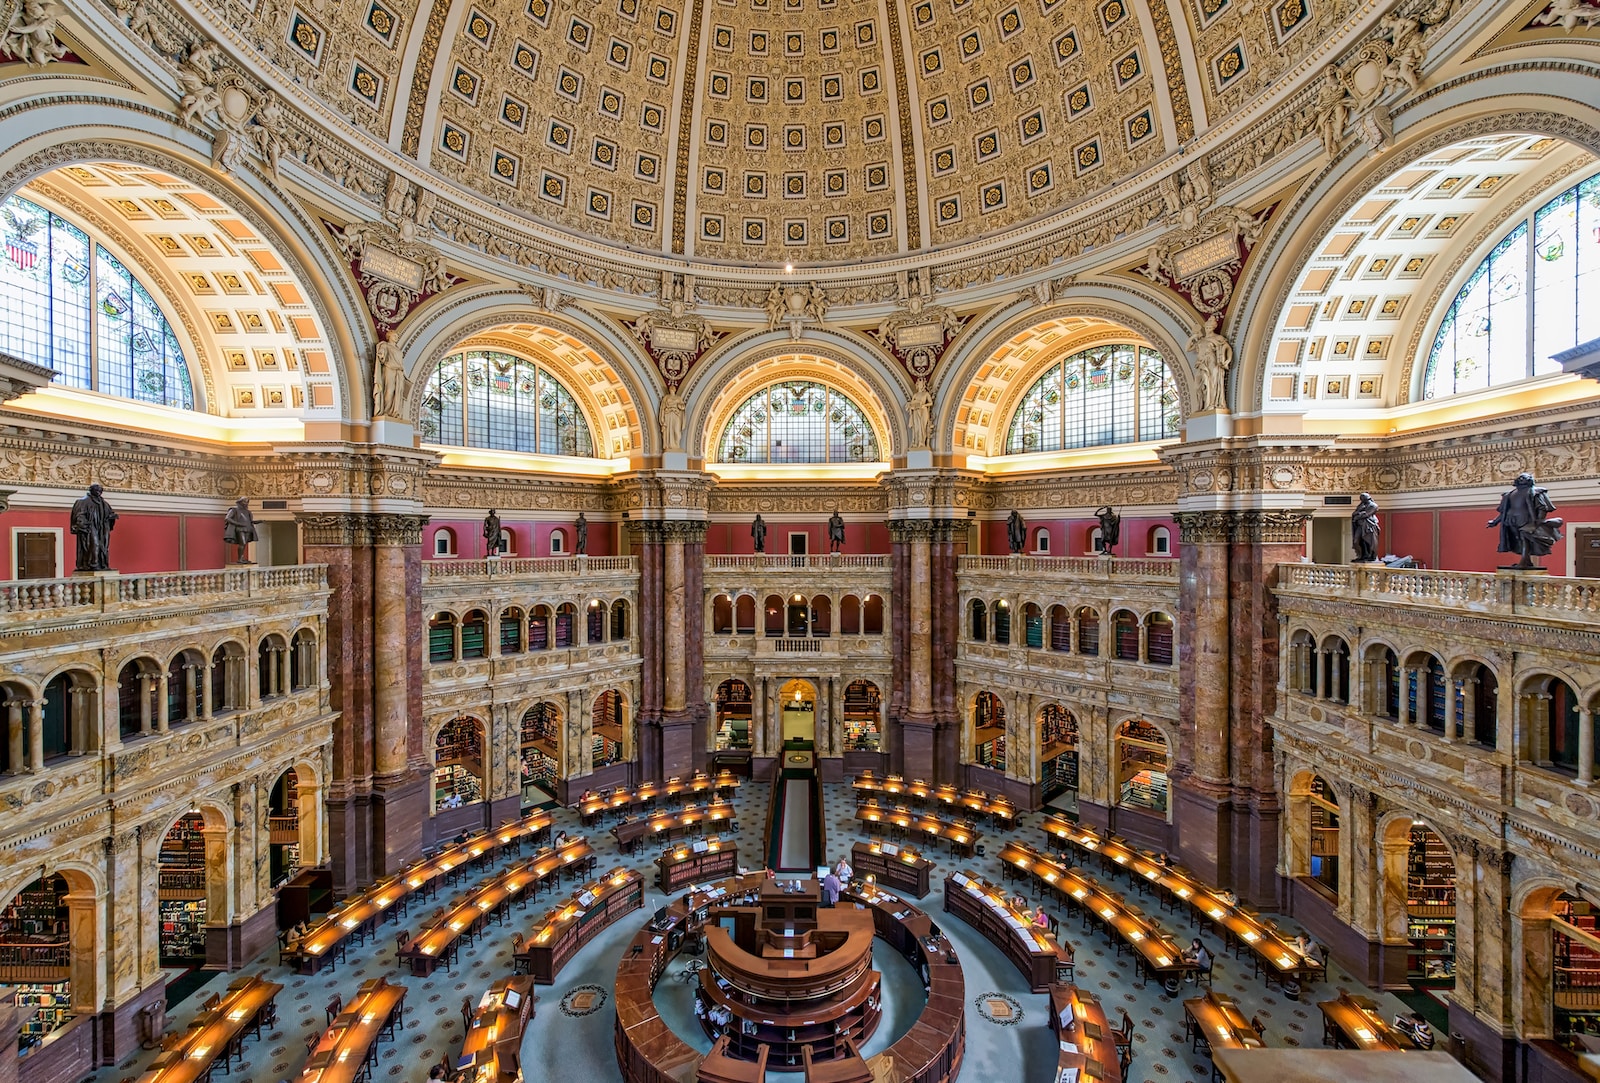 Library of Congress - a large ornate building with many arches and thousands of books